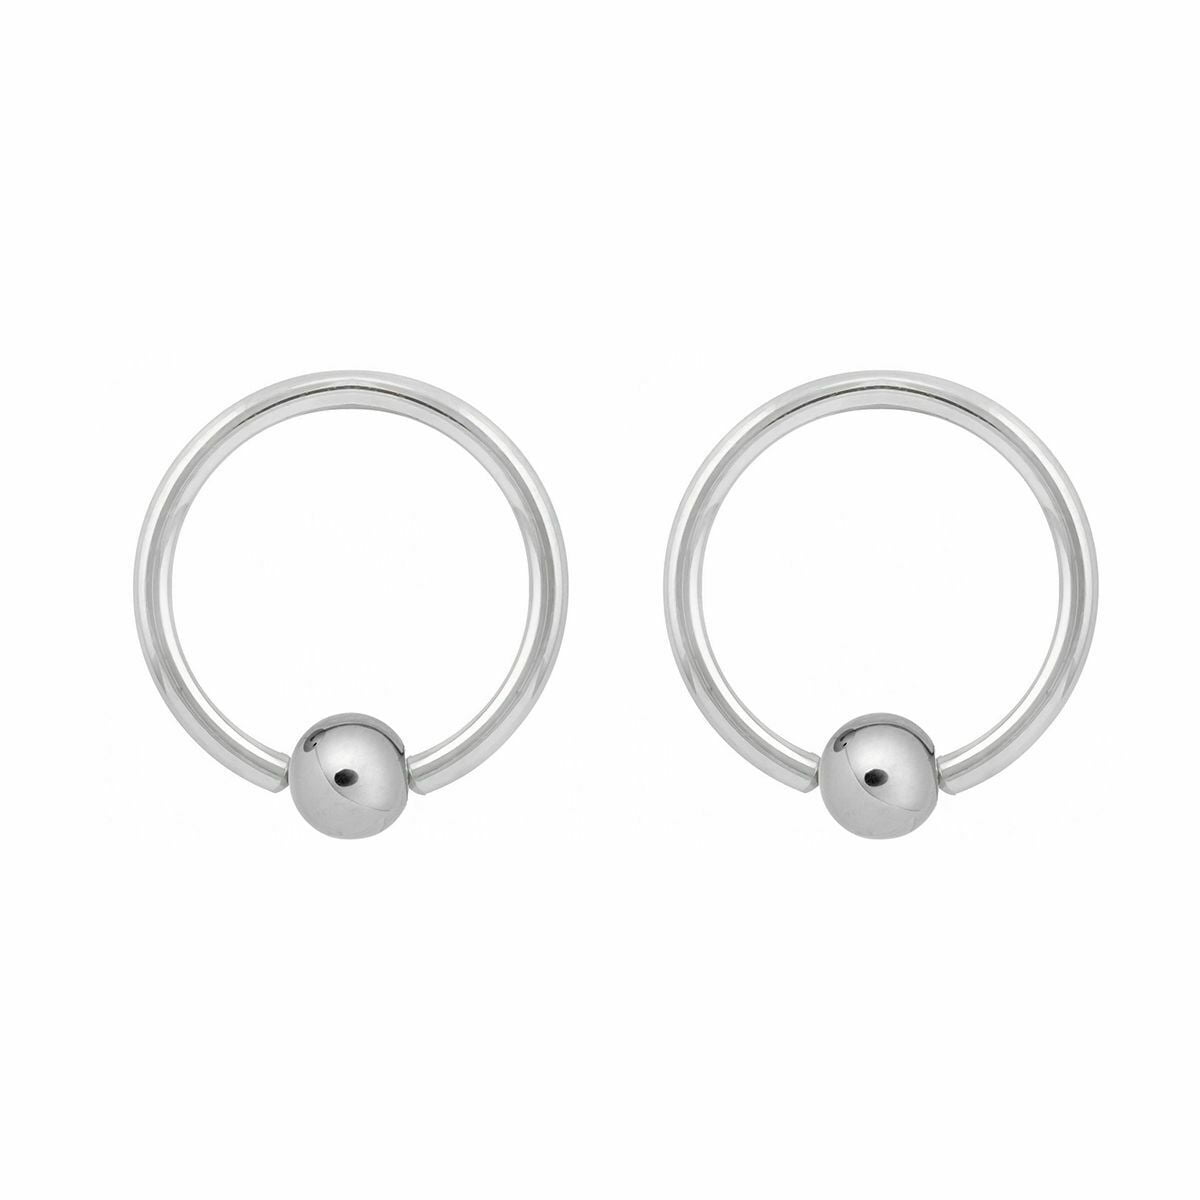 Silver Wrench Cartilage Piercing Captive Ring Tragus Earring 16 Gauge 1/2" 